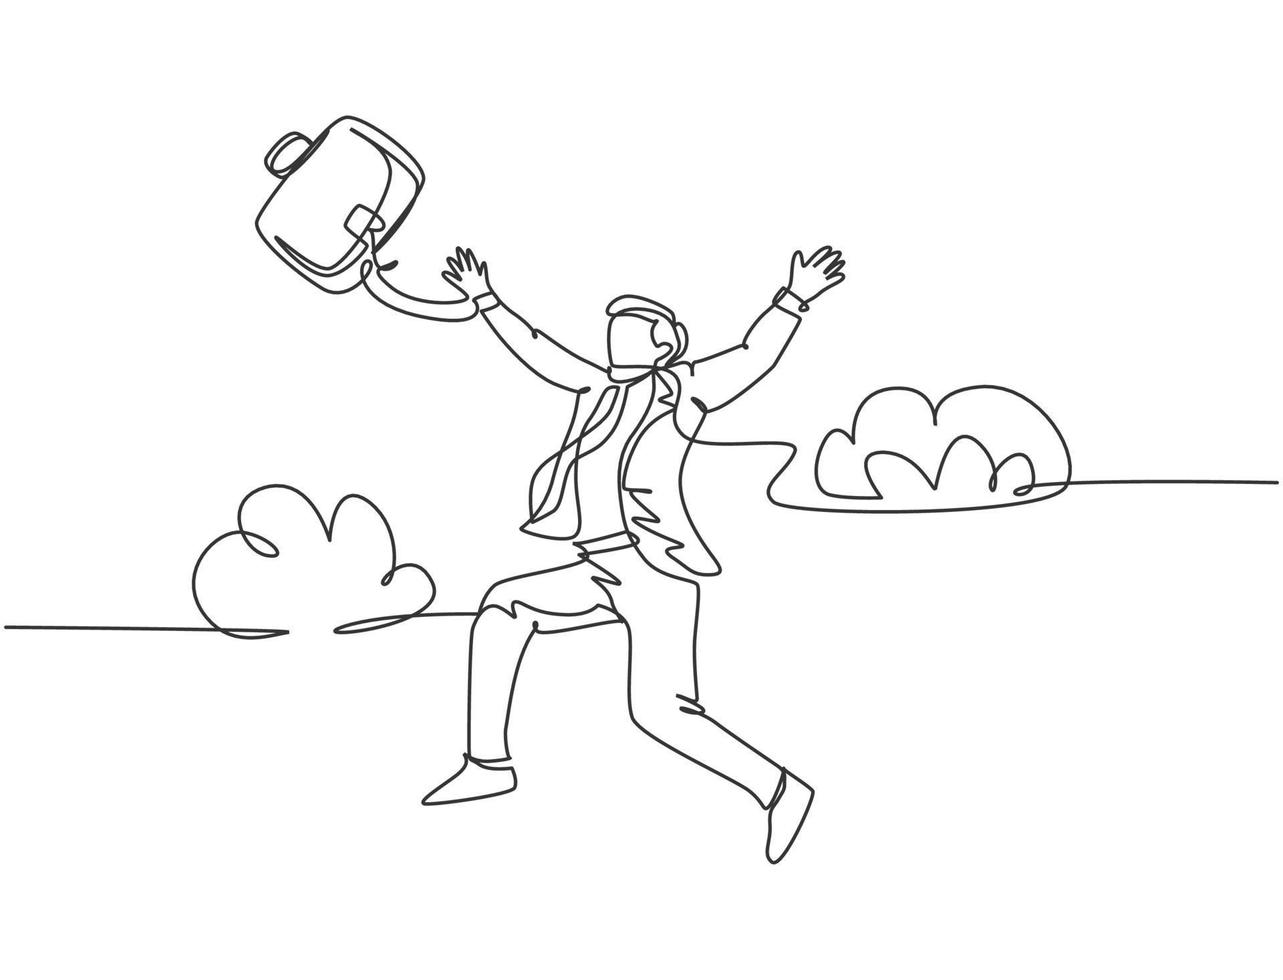 One line drawing of young happy and energetic business man throwing a briefcase jumping over the cloud. Business success celebration concept. continuous line draw design graphic vector illustration